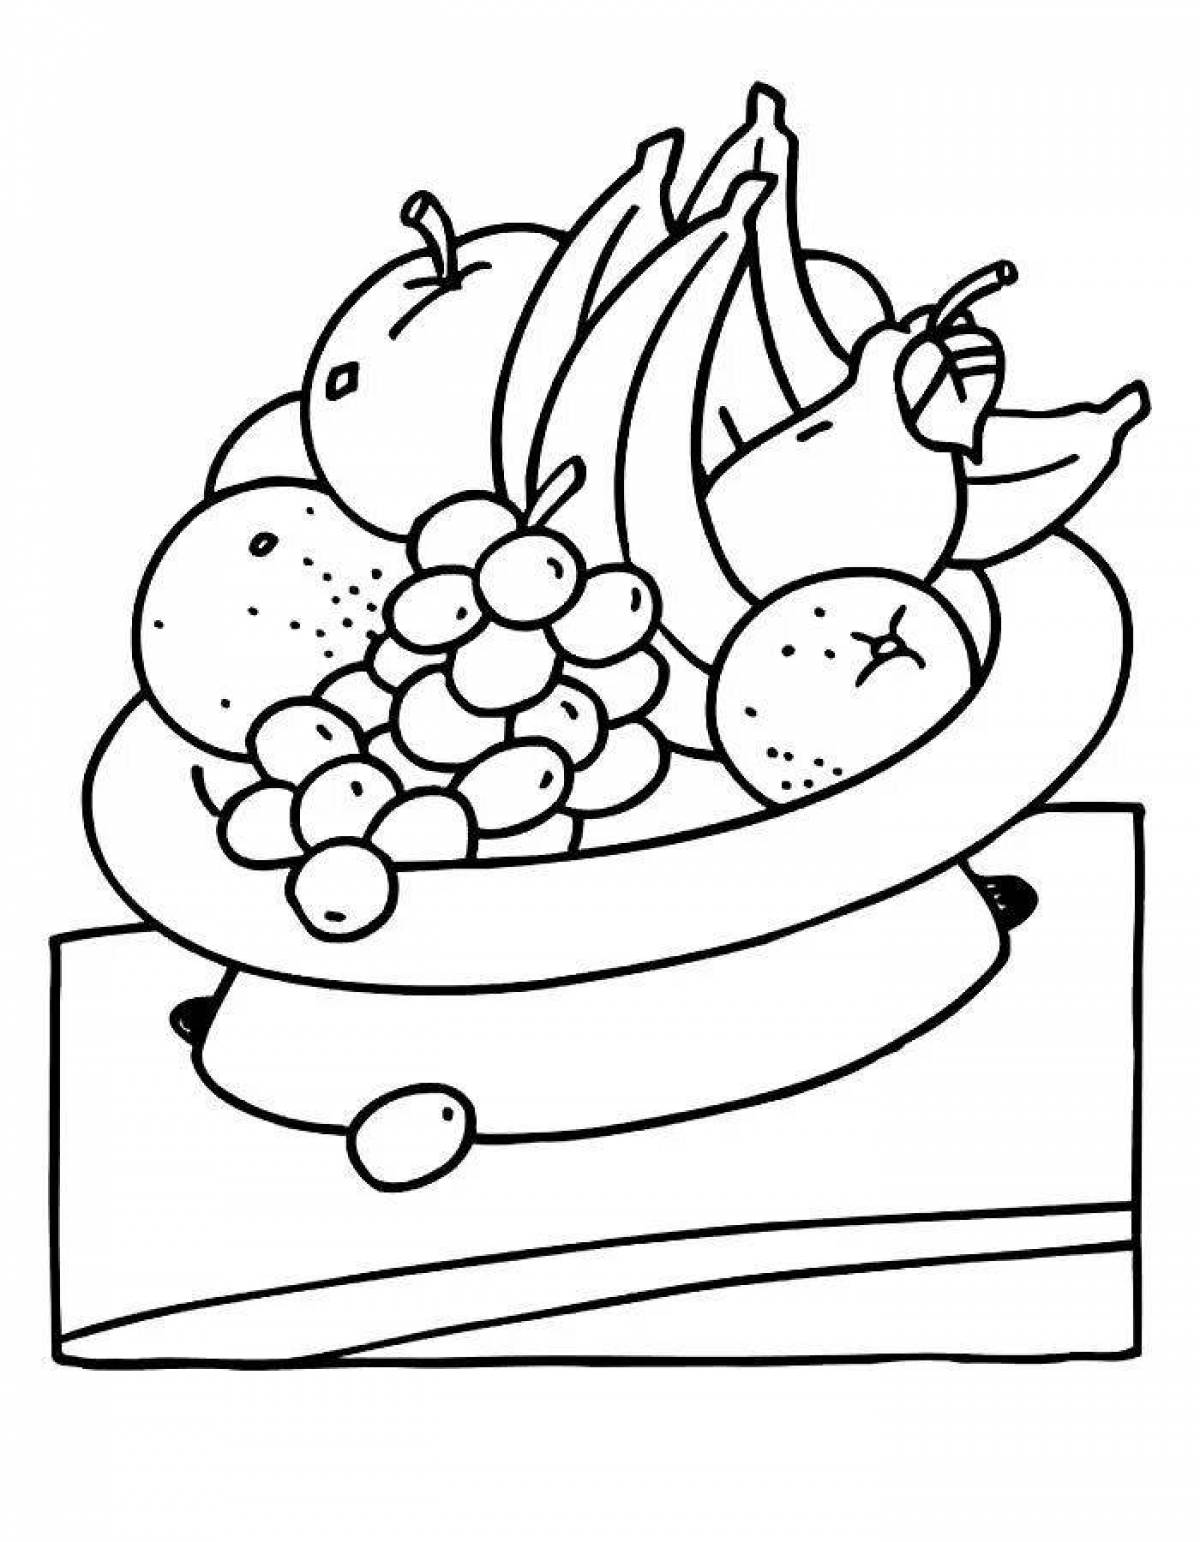 Tempting fruit plate coloring page